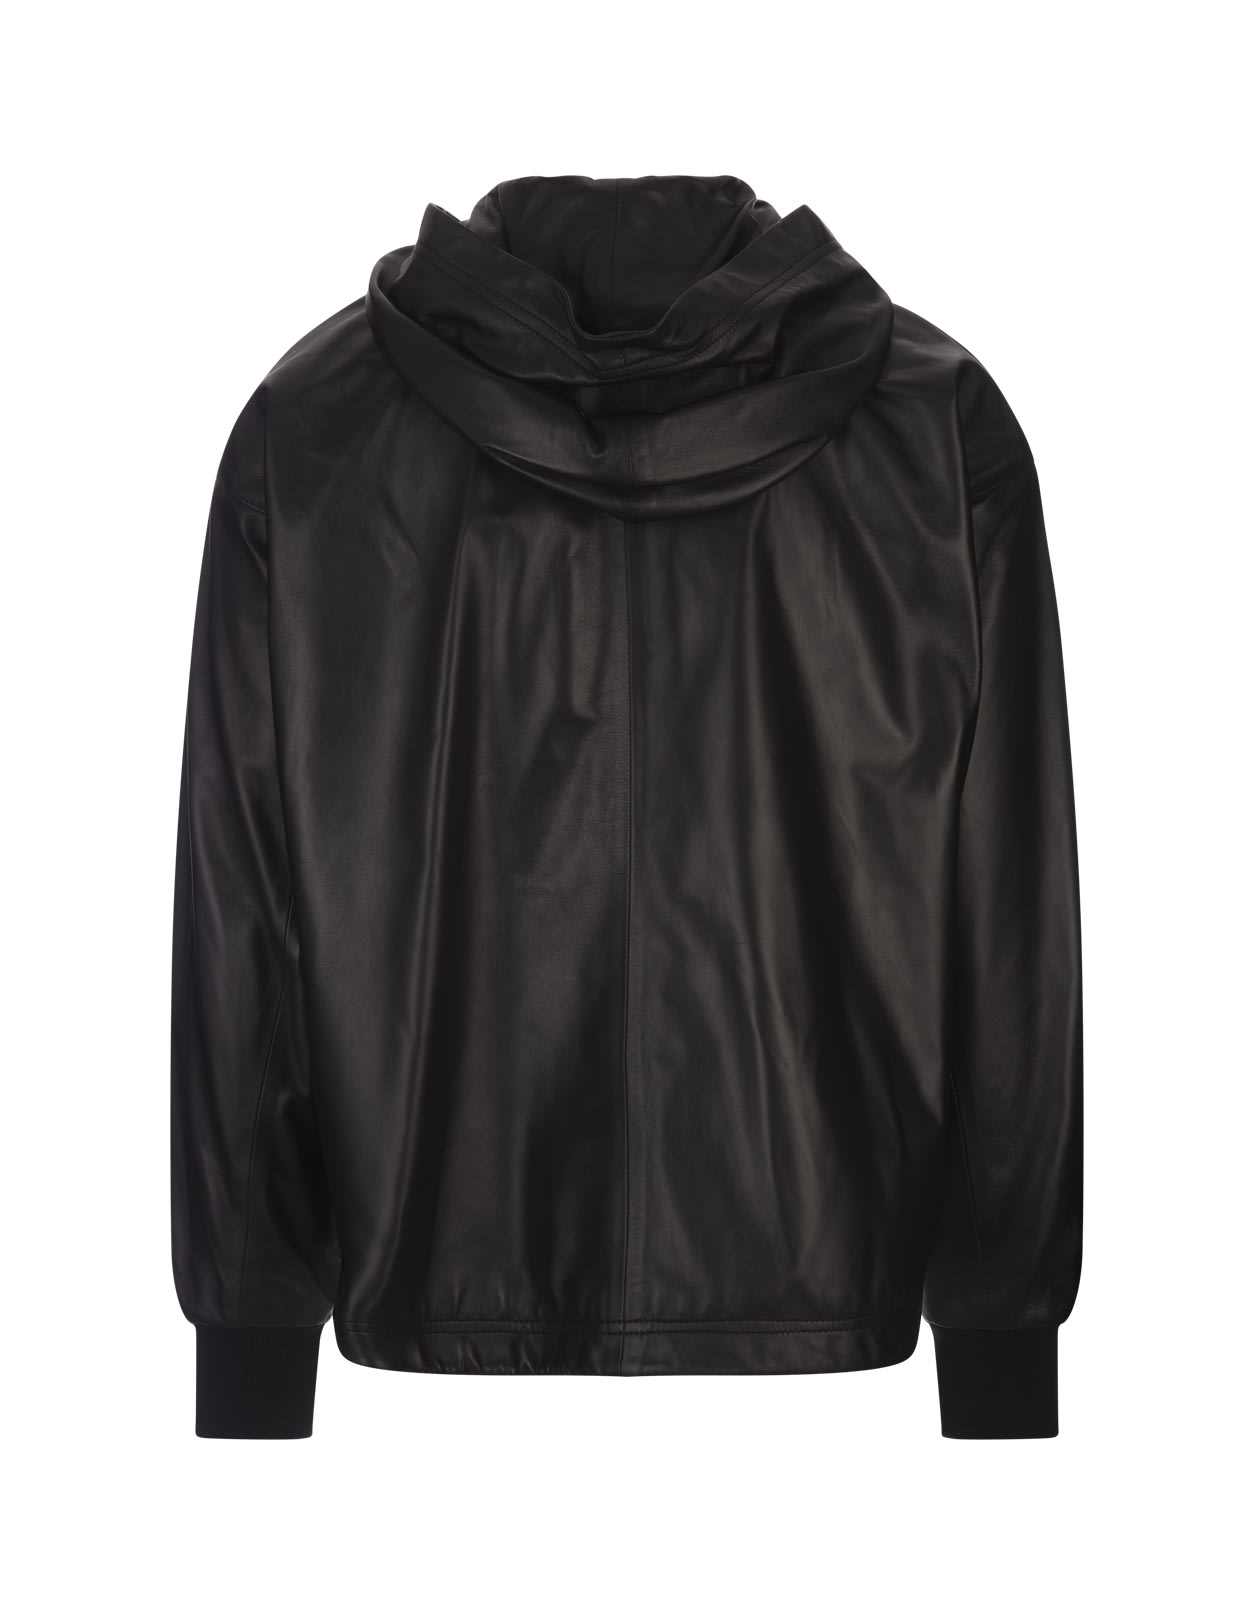 Shop Palm Angels Black Hooded Leather Jacket With Logo